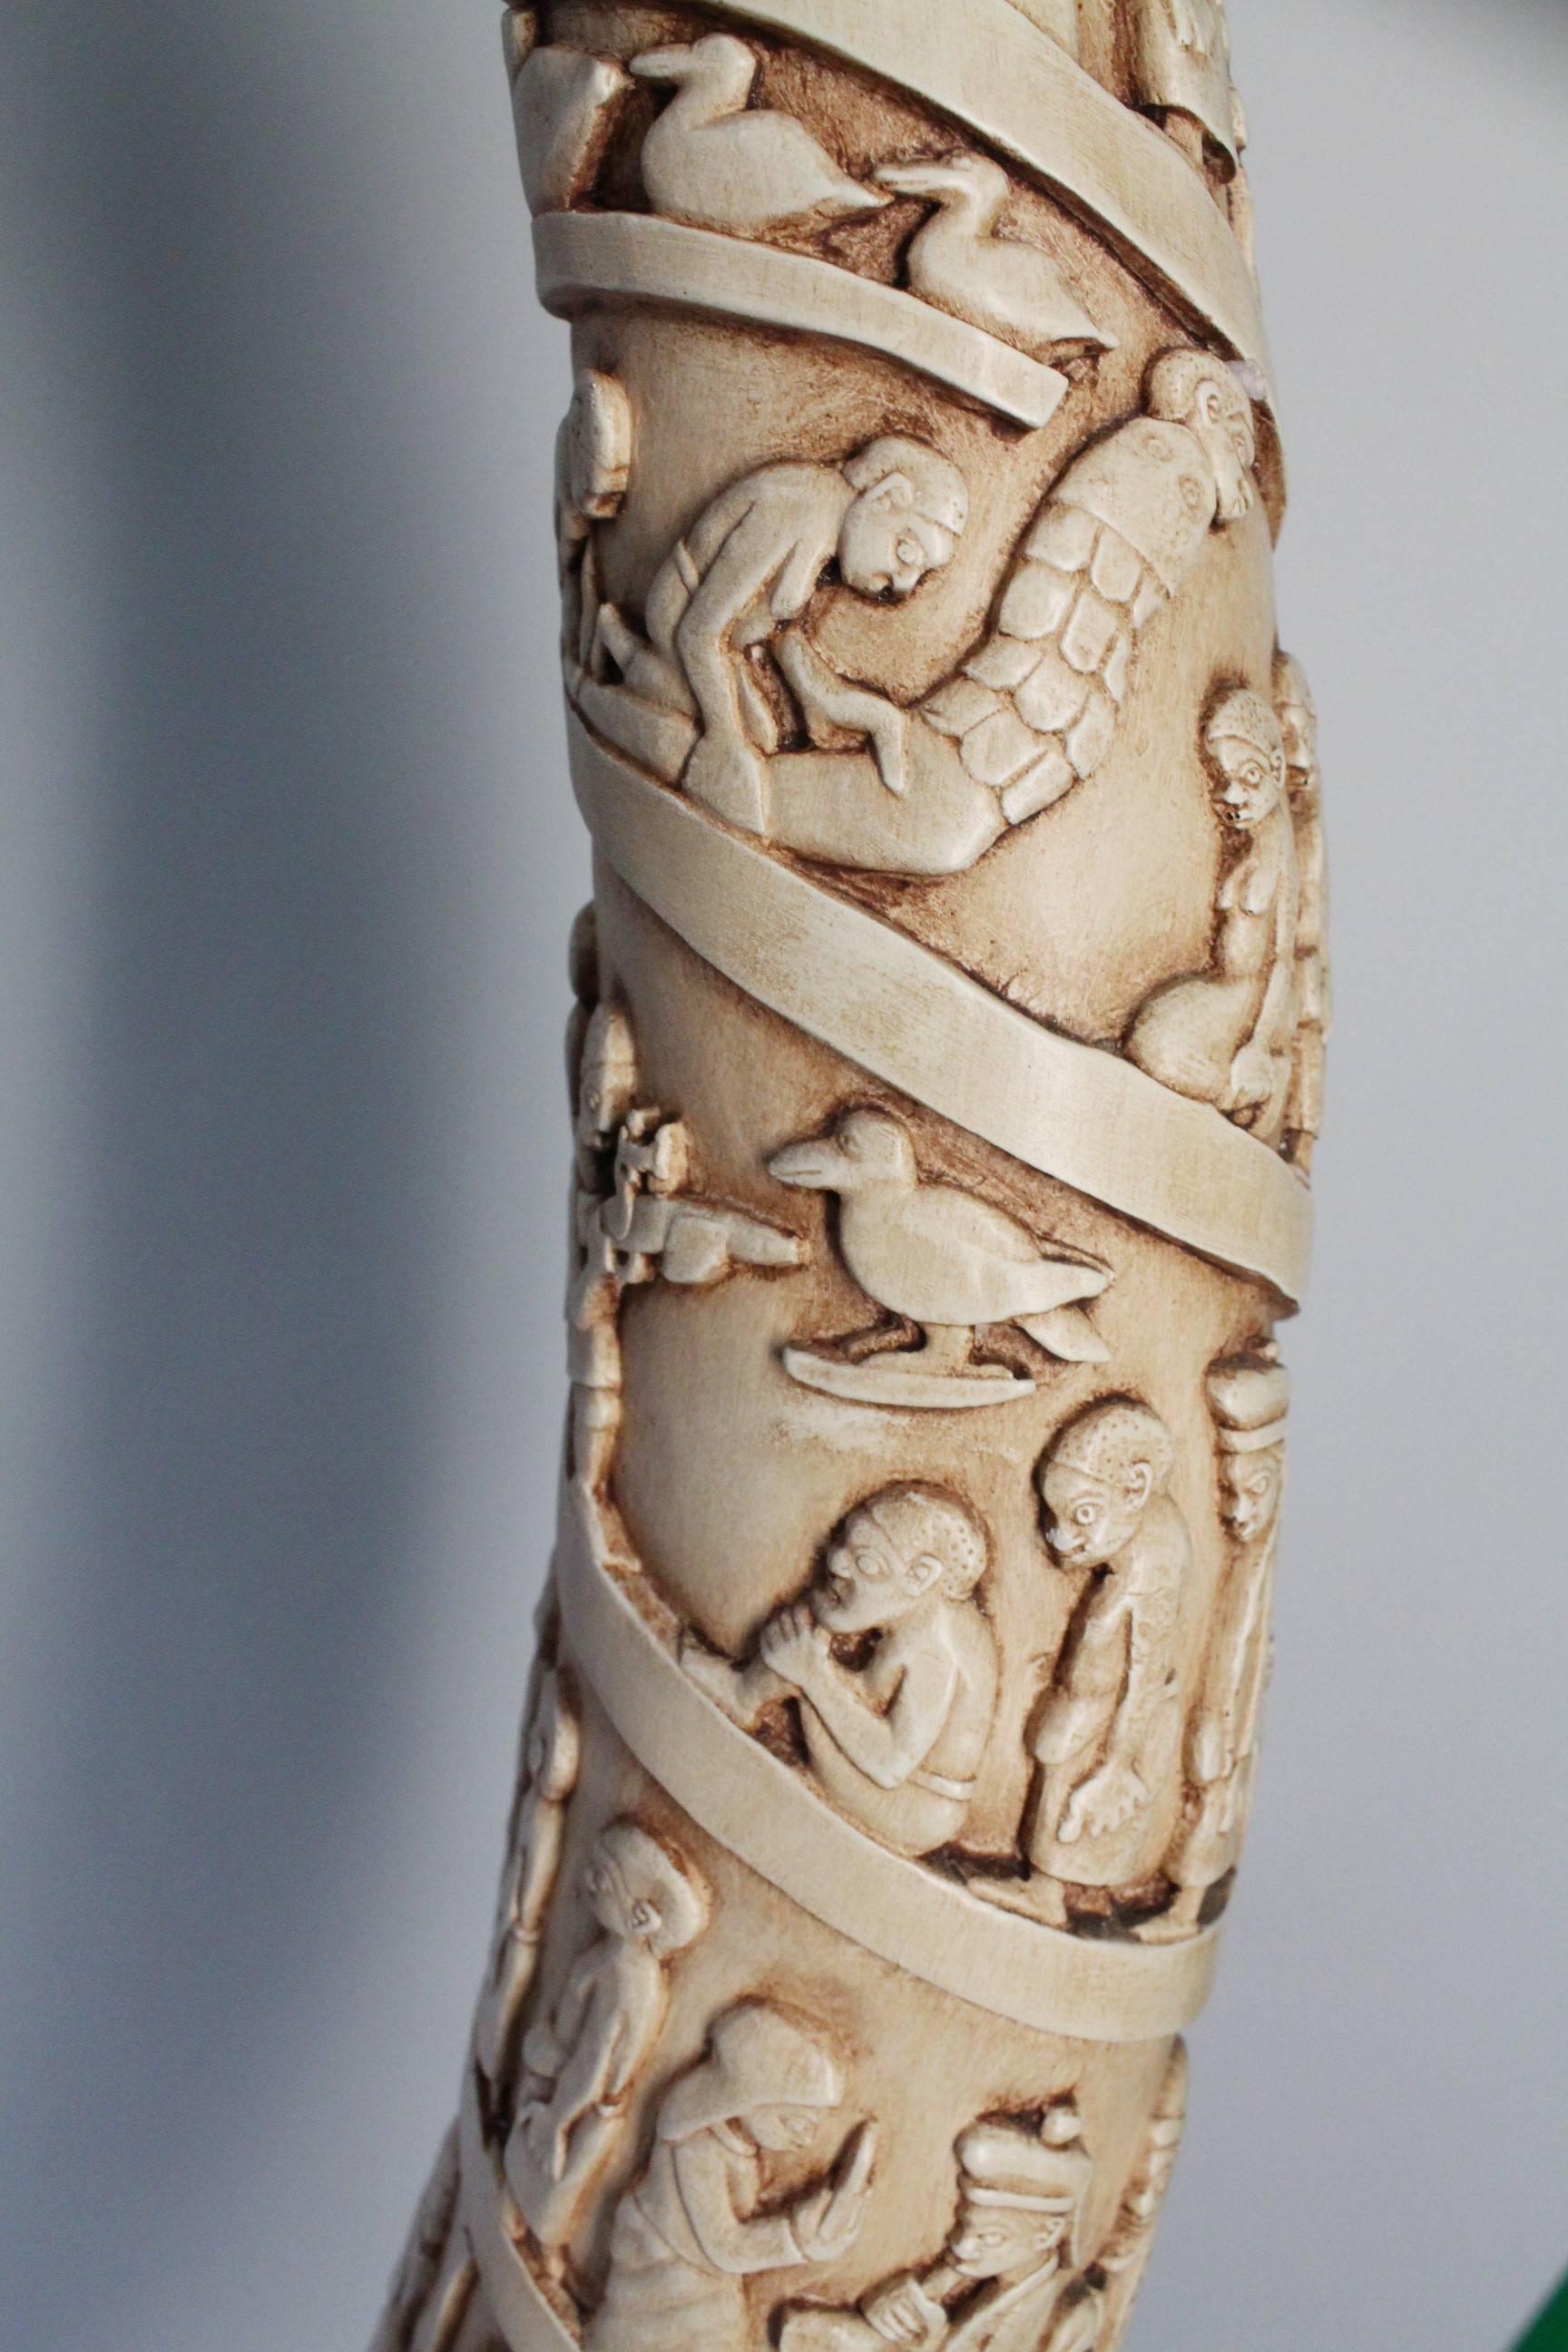 American Carved Tusk Shaped Sculptures in Plaster by Austin, 1986